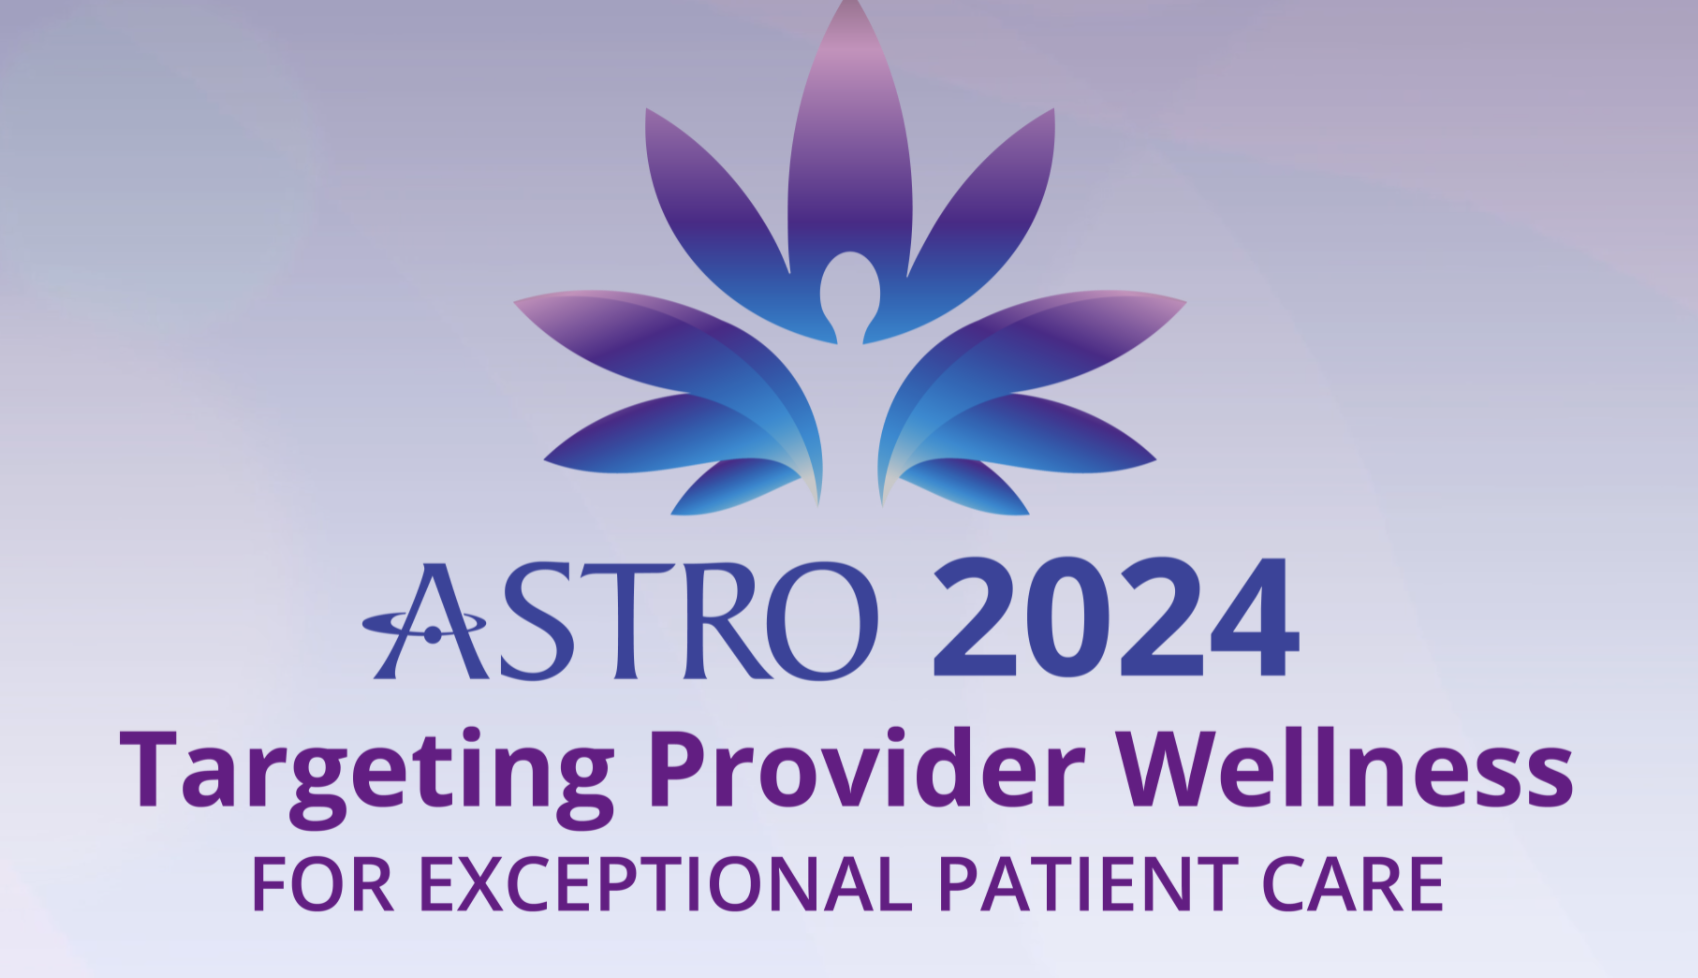 American Society for Radiation Oncology (ASTRO) to Host Annual Meeting in Washington, DC, Sept. 29-Oct. 2